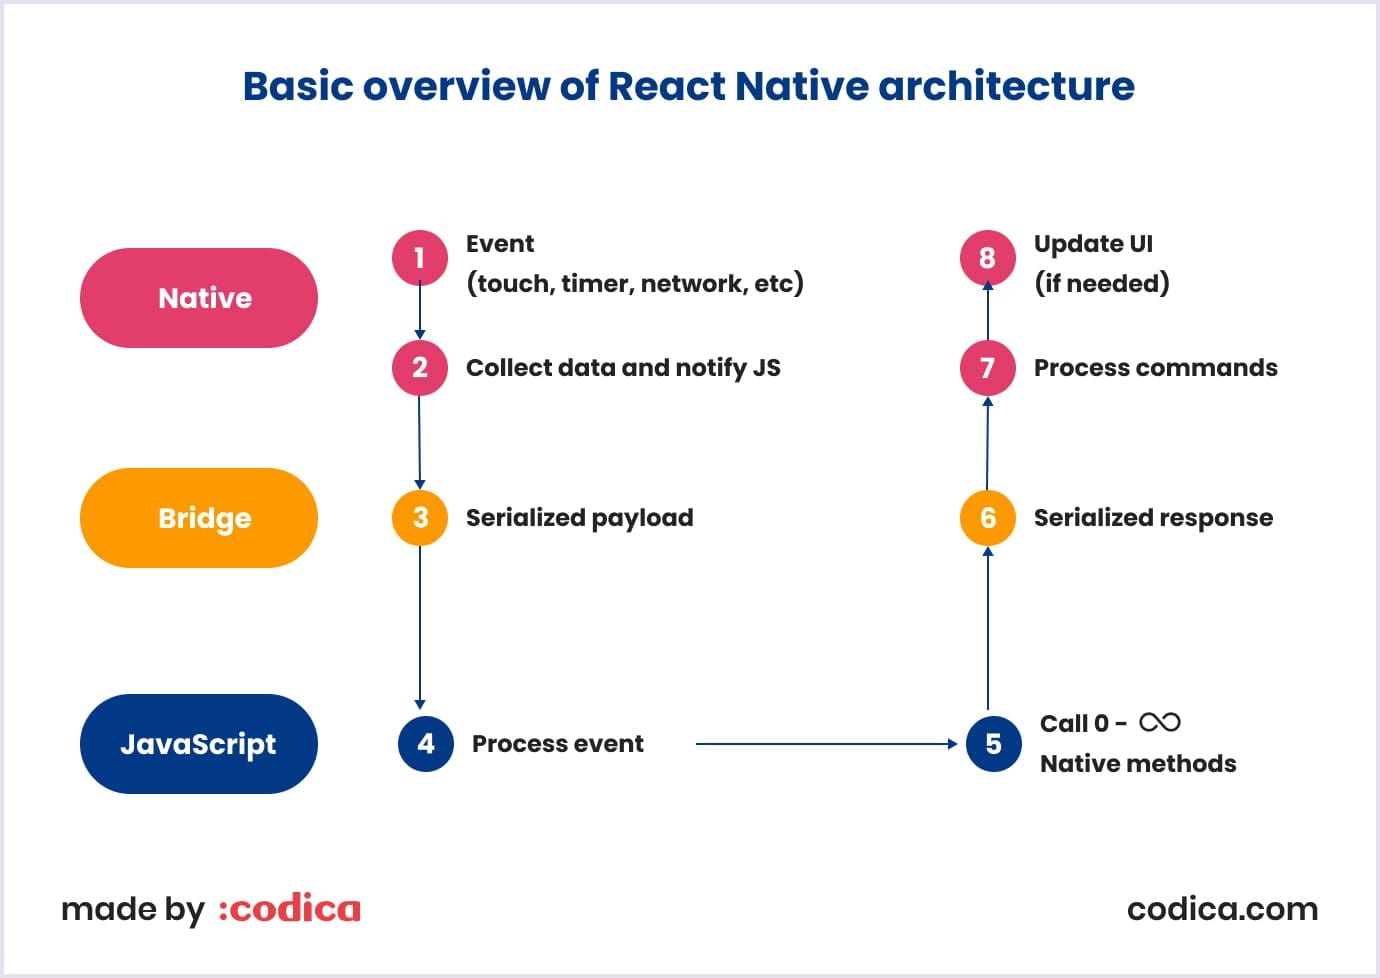 Basic overview of React Native architecture